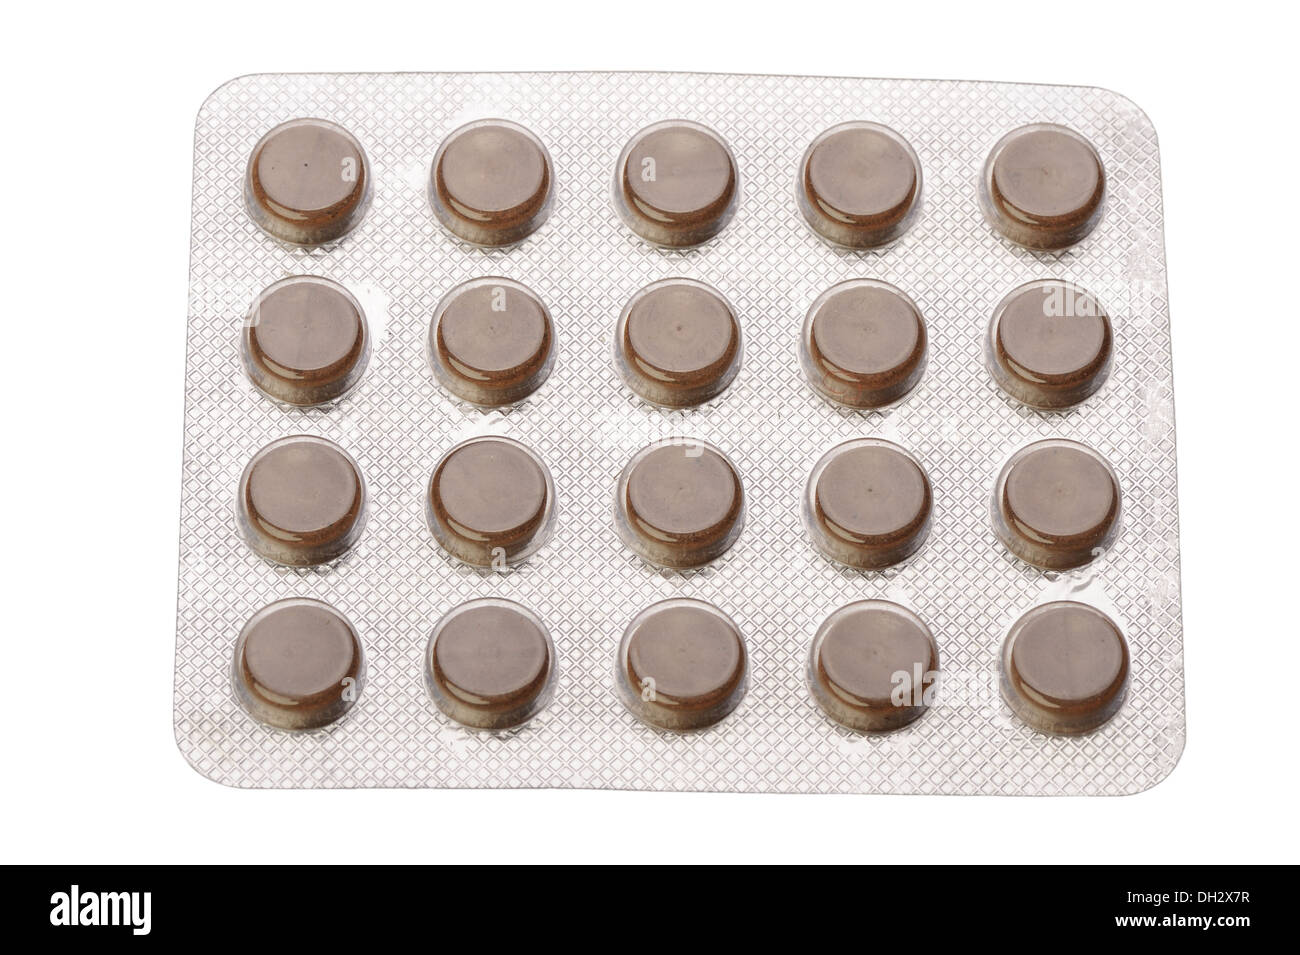 Pills in a blister pack Stock Photo